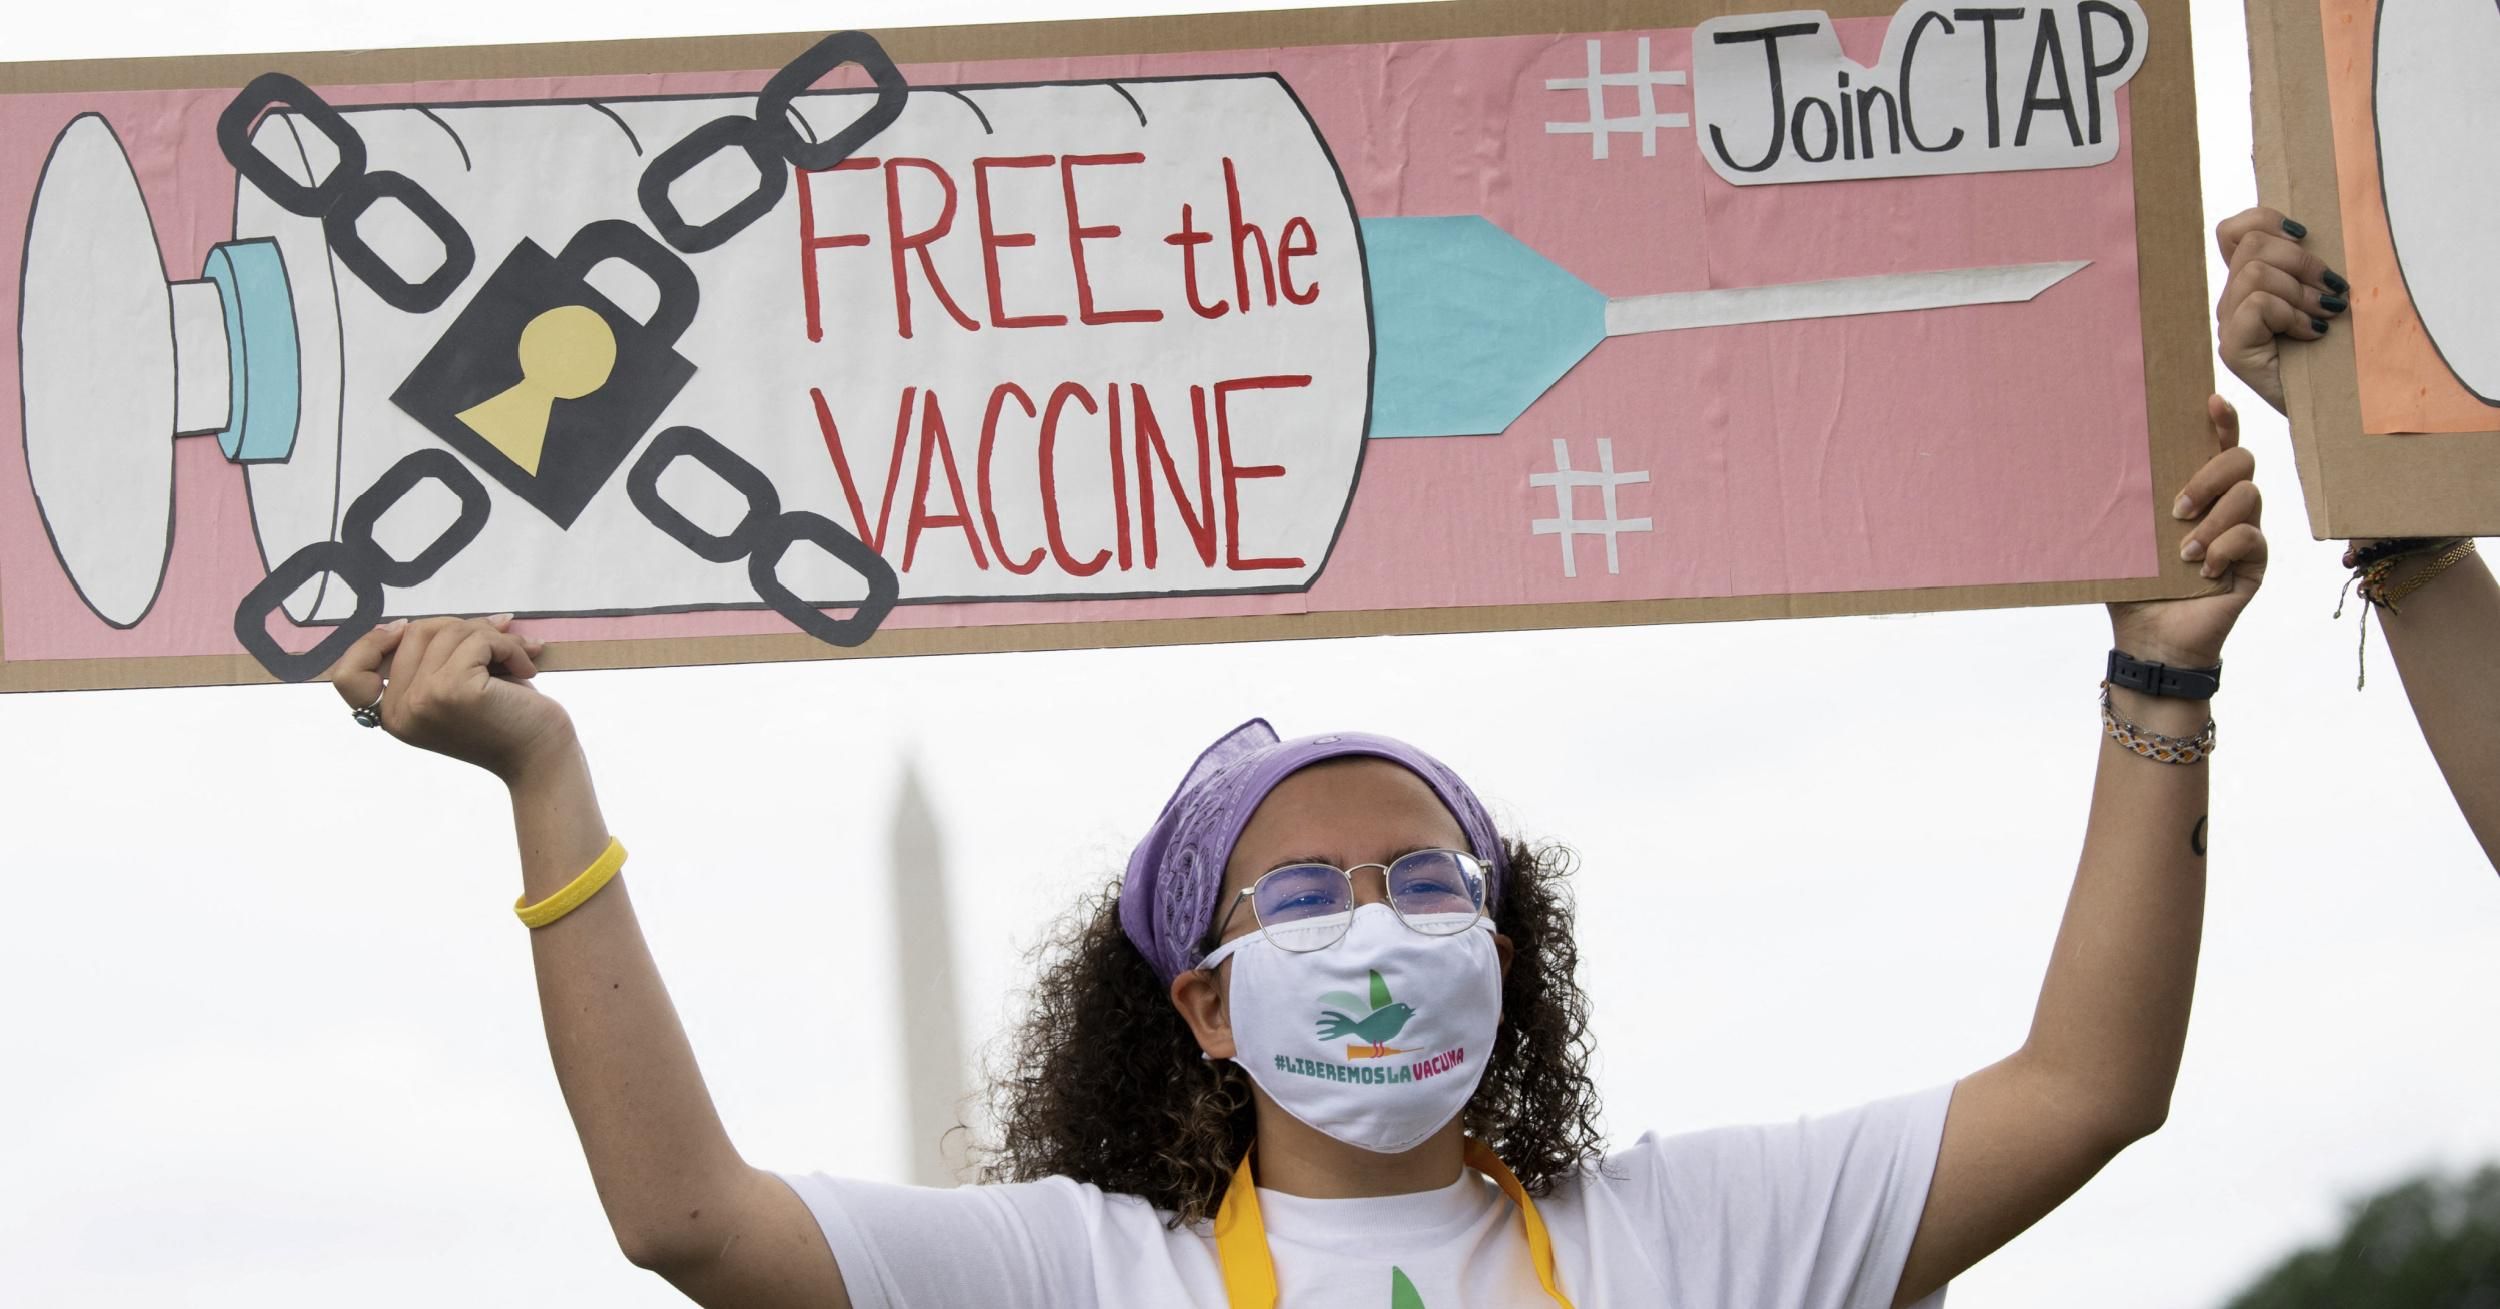 Demonstrators hold a rally to "Free the Vaccine," calling on the U.S. to commit to a global coronavirus plan that includes sharing formulas with the world to help ensure that every nation has access to a vaccine, on the National Mall in Washington, D.C., on May 5, 2021. Shortly after the rally kicked off, the Biden administration announced its support for a global waiver on patent protections for Covid-19 vaccines, and said it will negotiate the terms at the World Trade Organization. (Photo: Saul Loeb / AFP